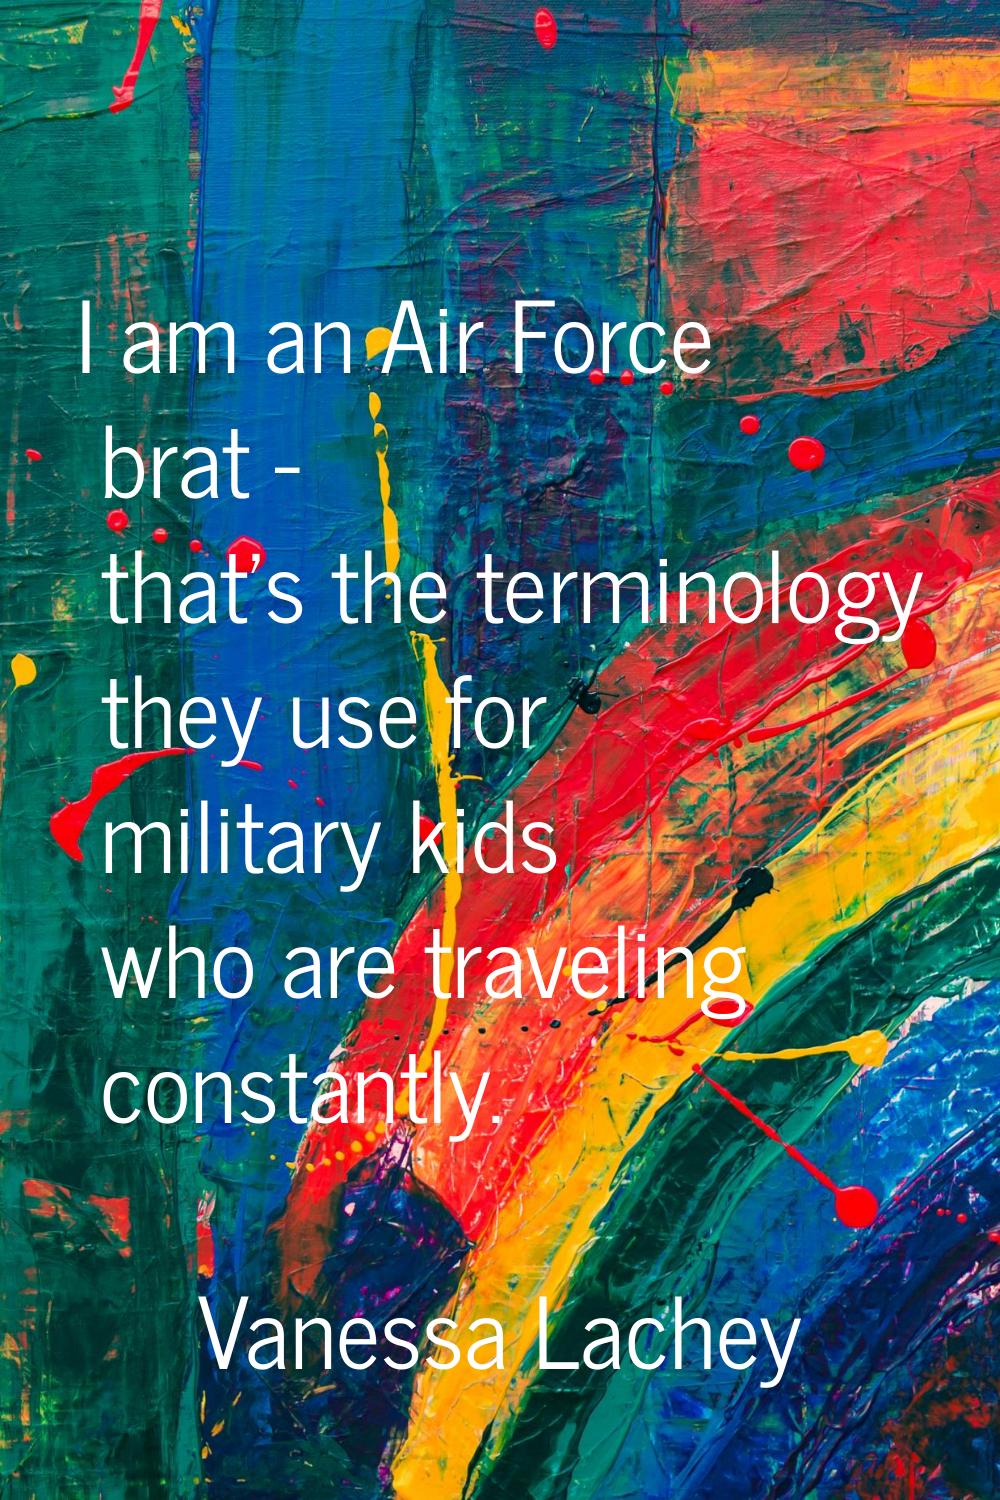 I am an Air Force brat - that's the terminology they use for military kids who are traveling consta